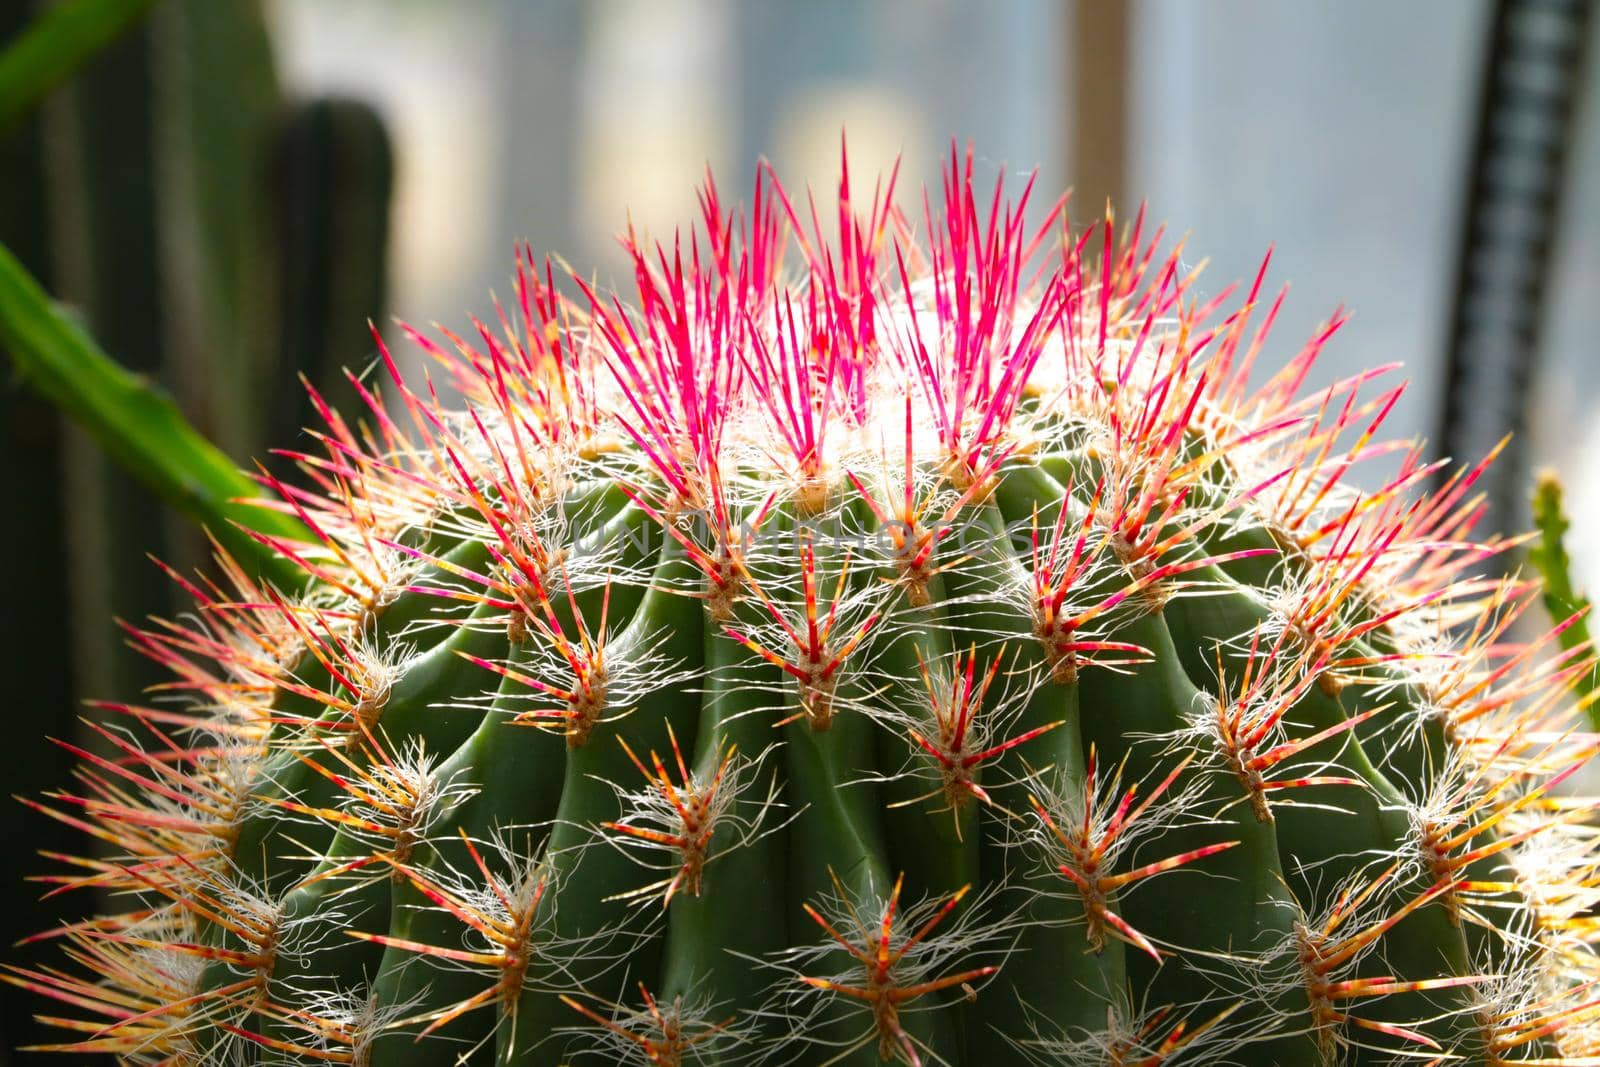 Close-up of a flowering cactus with large needles, a houseplant. by kip02kas